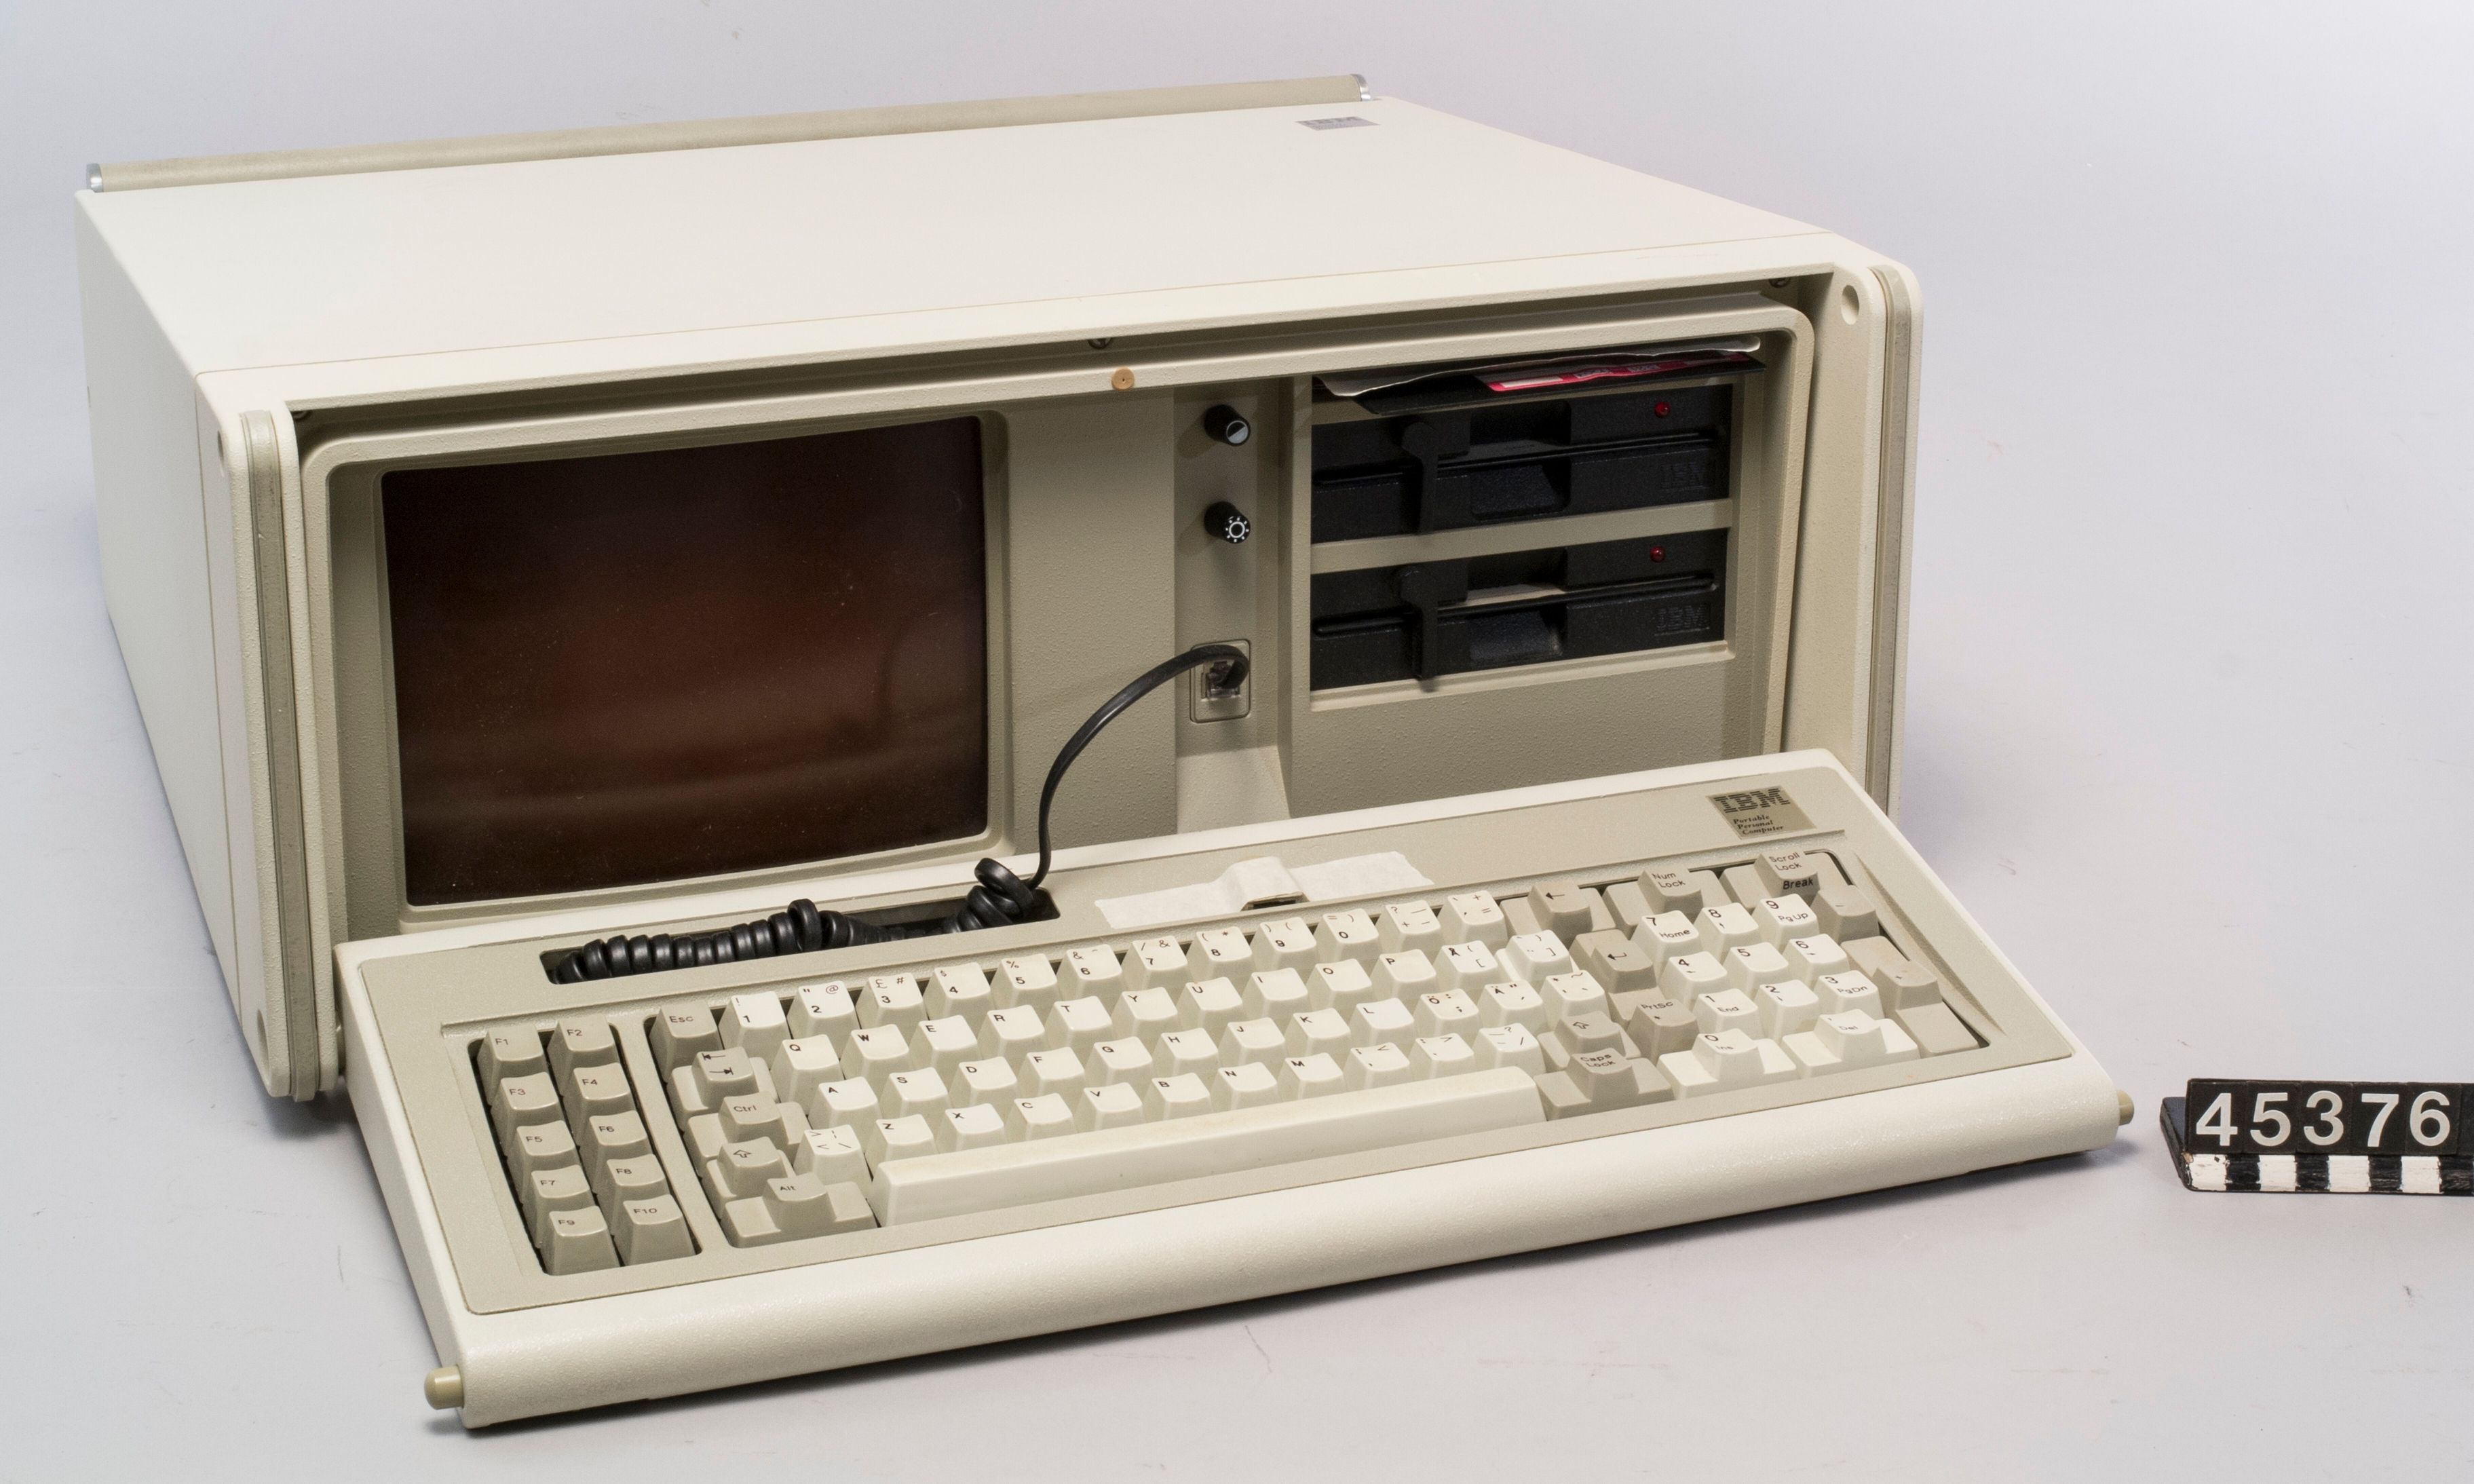 IBM Portable Computer showing keyboard and body of device